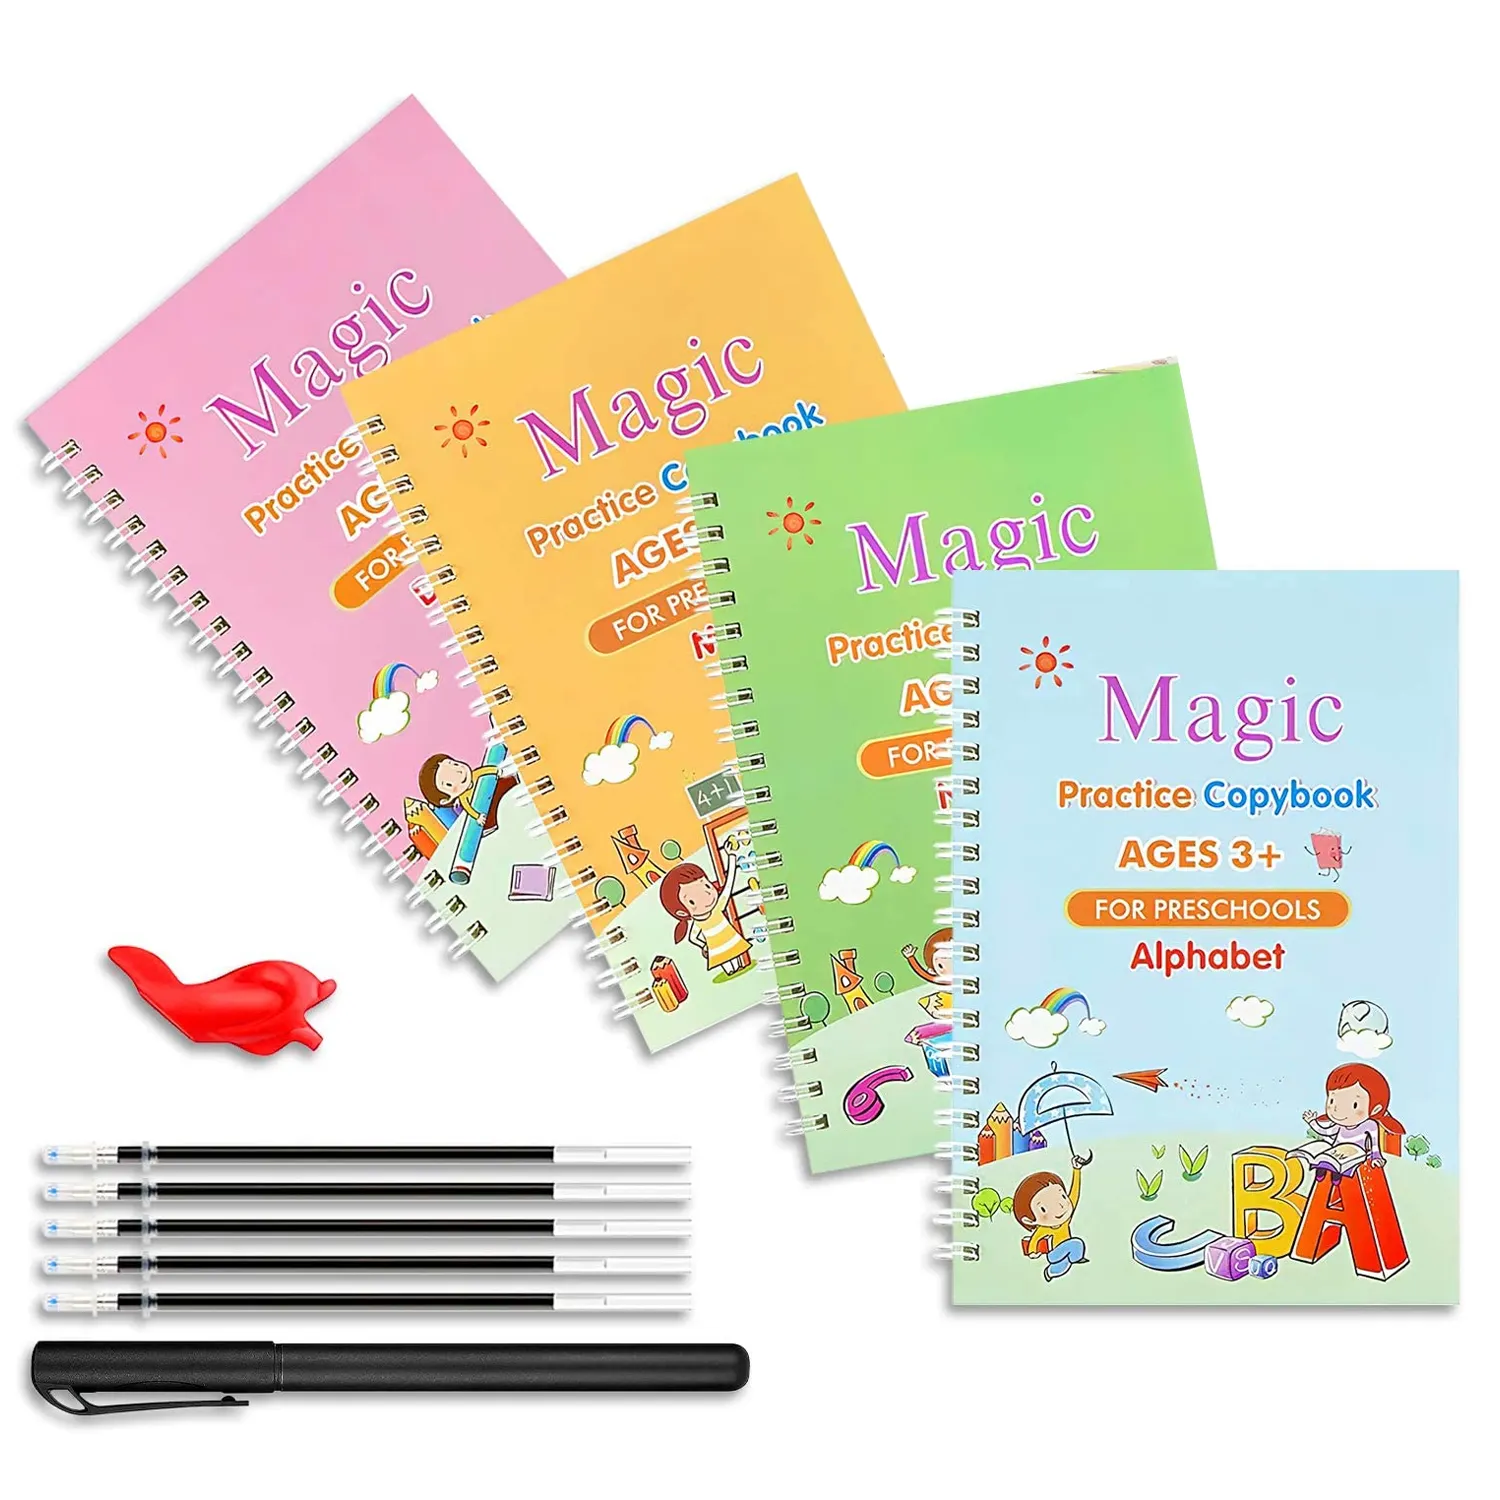 4 Books 1 Pen Perfect Gifts for Preschool Calligraphy Practice Reusable Groove Copybook Thick Paper Magic Practice Copybook